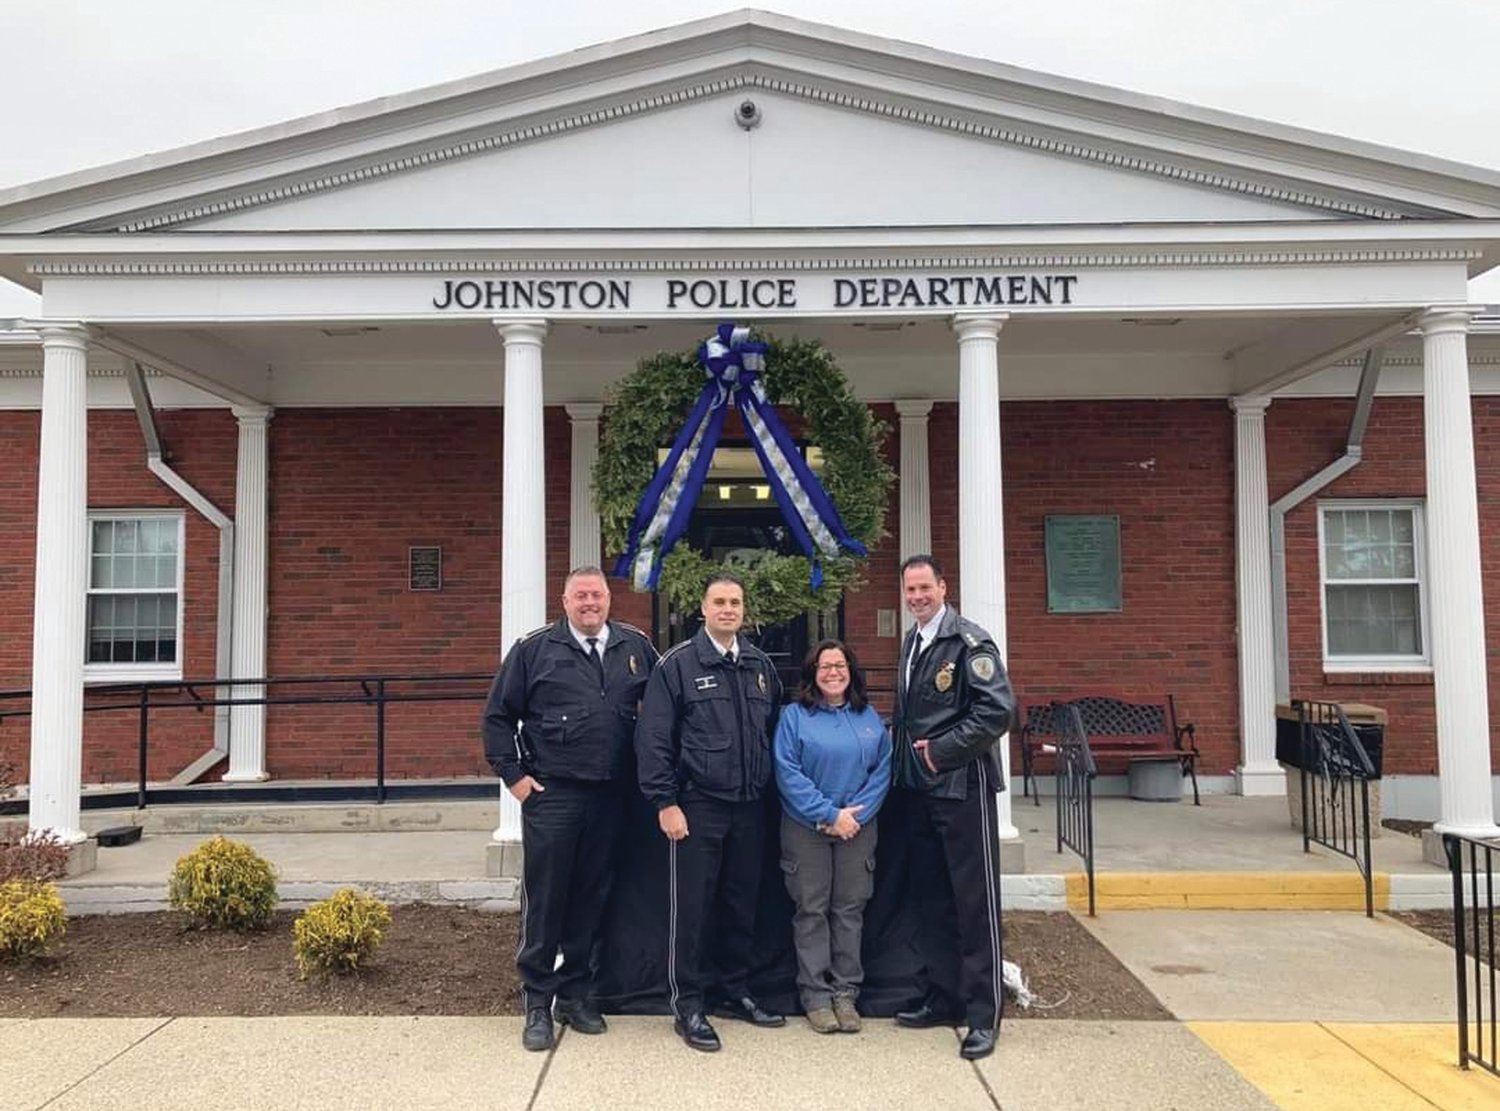 GENEROUS WREATH: Johnston Police have shared a photo of the station’s newest holiday decoration. “Our sincere thanks to Connie and Dino Jacavone of Jacavone Garden Center for decking our station with a beautiful holiday wreath,” Johnston Police wrote on their Facebook page. “We appreciate the support!”